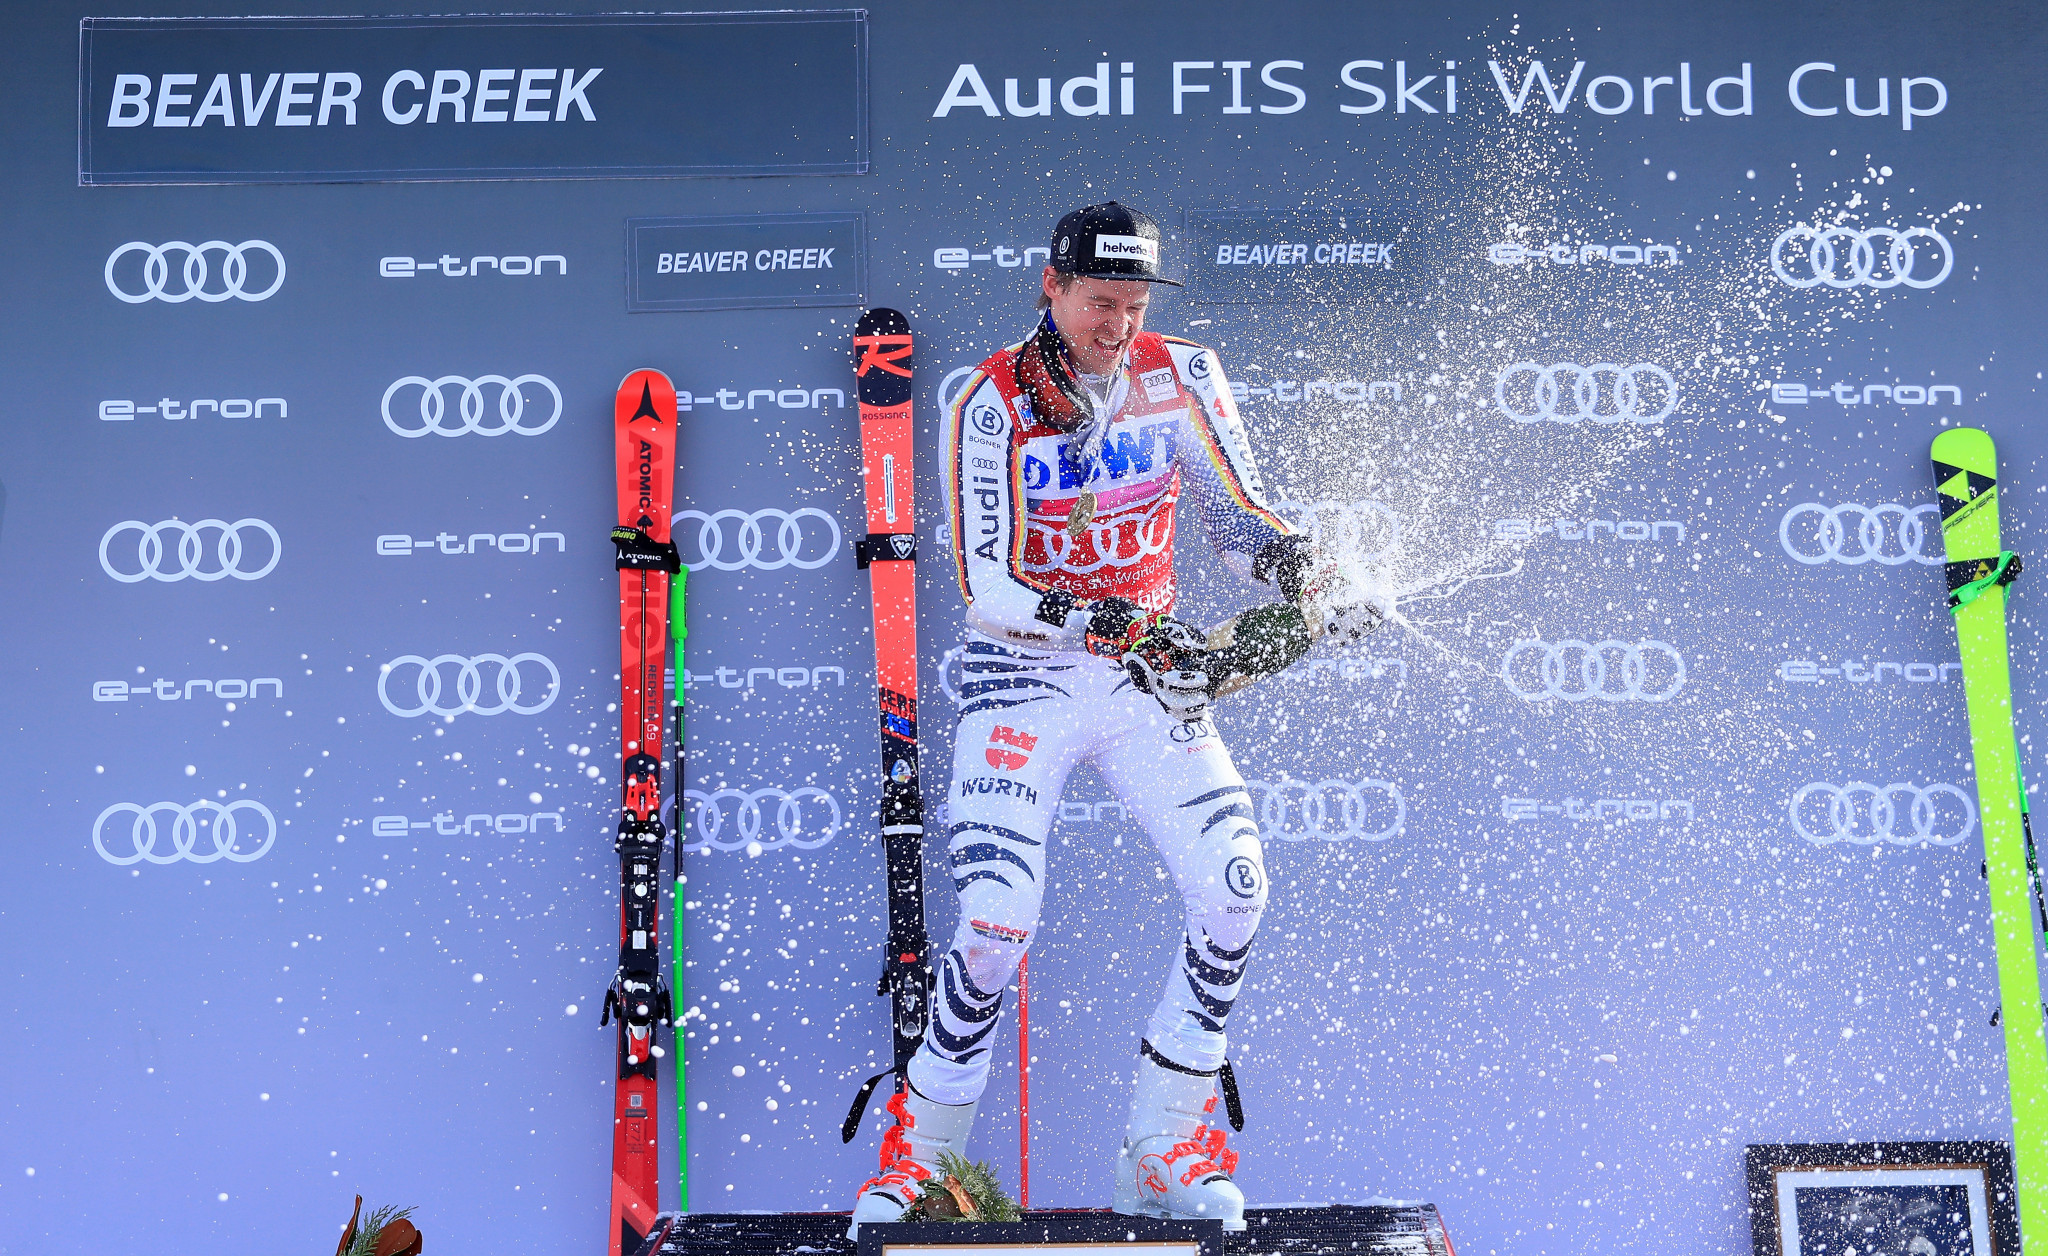 Luitz loses initial appeal after skier stripped of FIS World Cup win over oxygen tank use